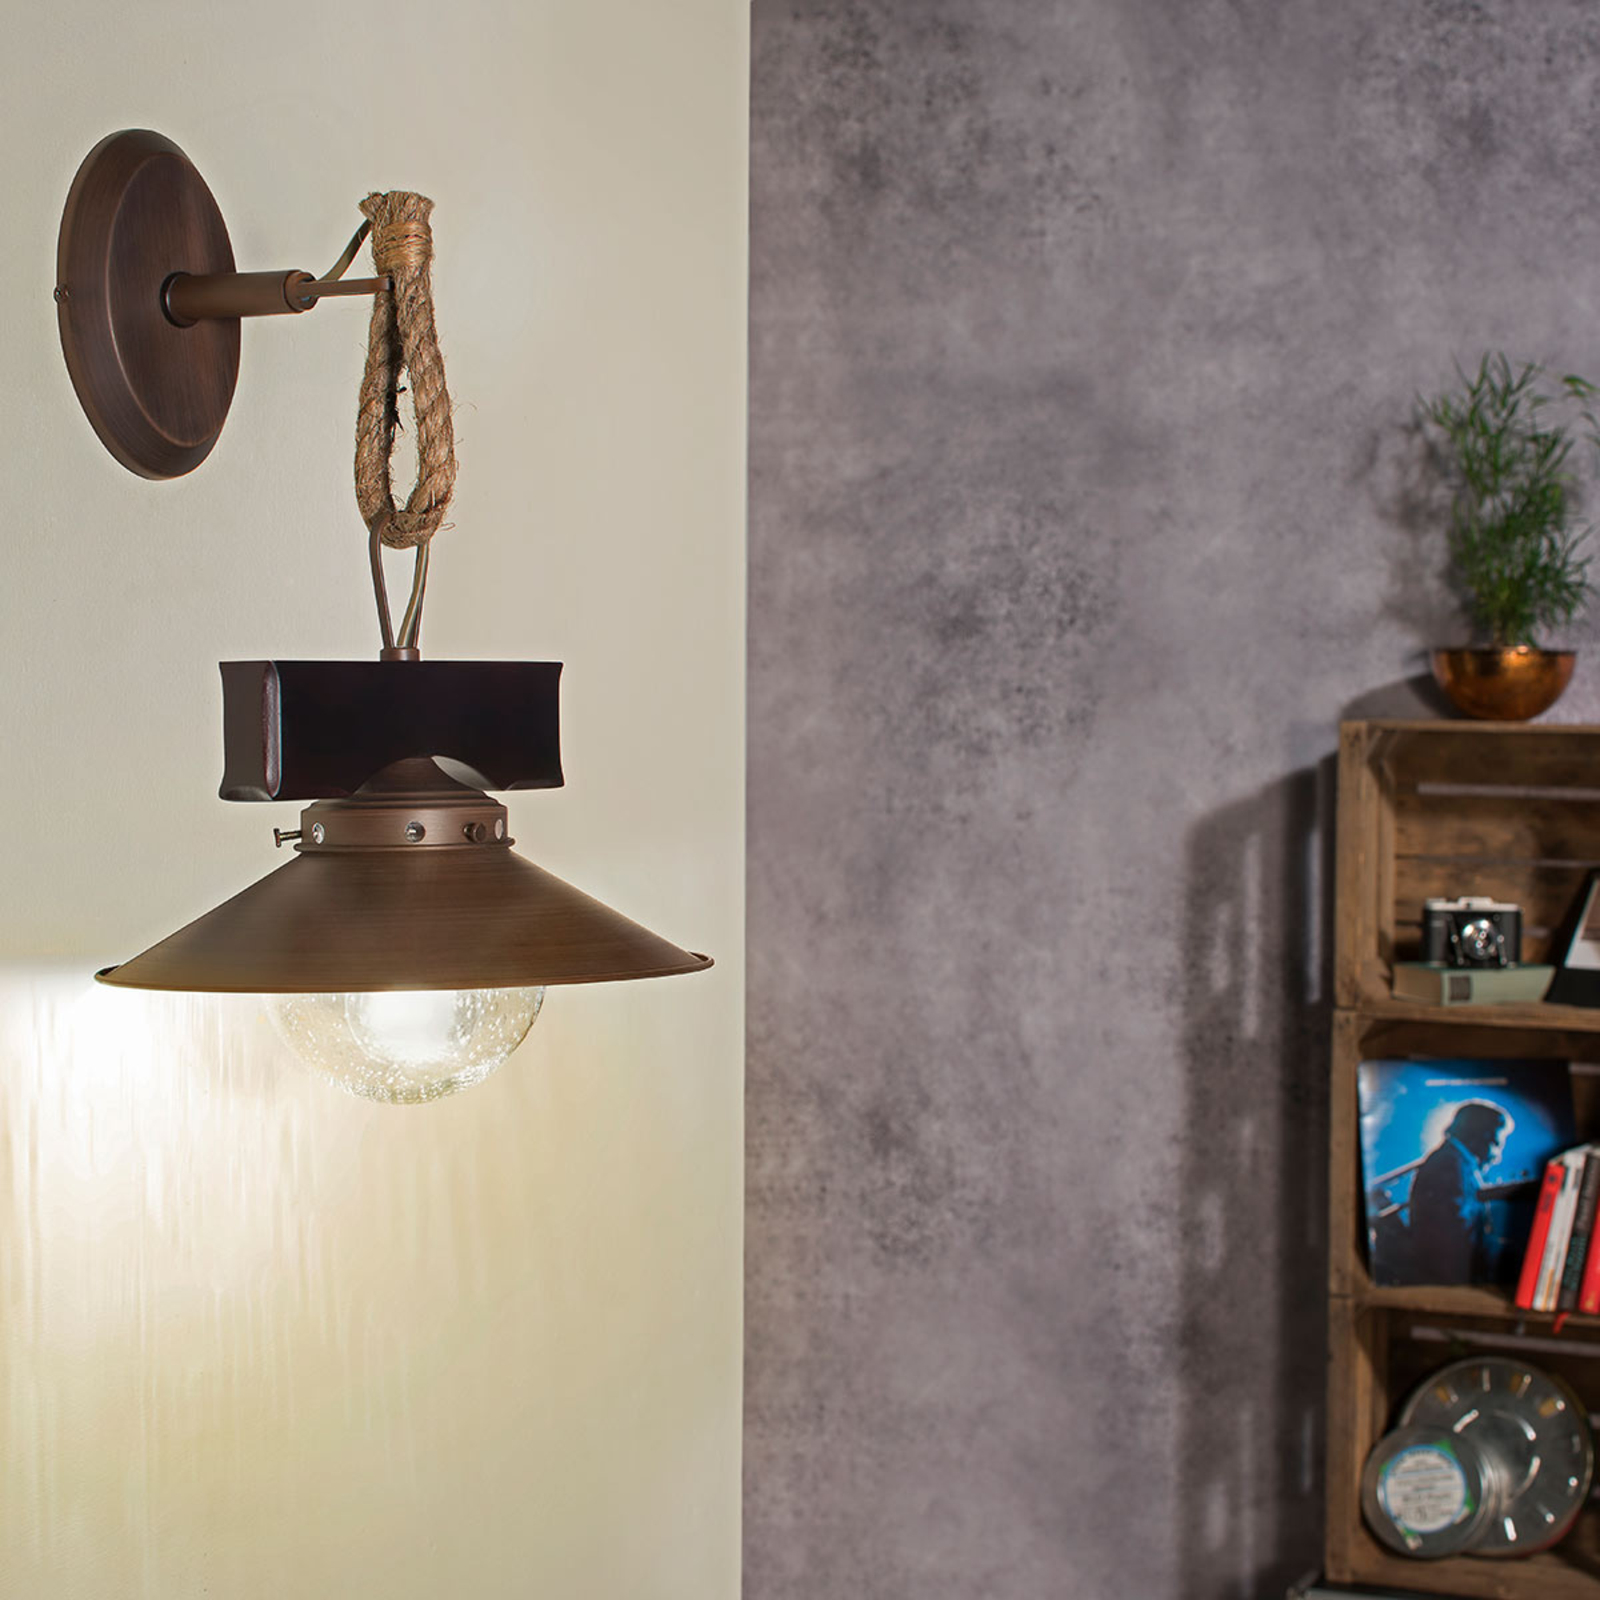 Rustic Nudos wall light with a mix of materials